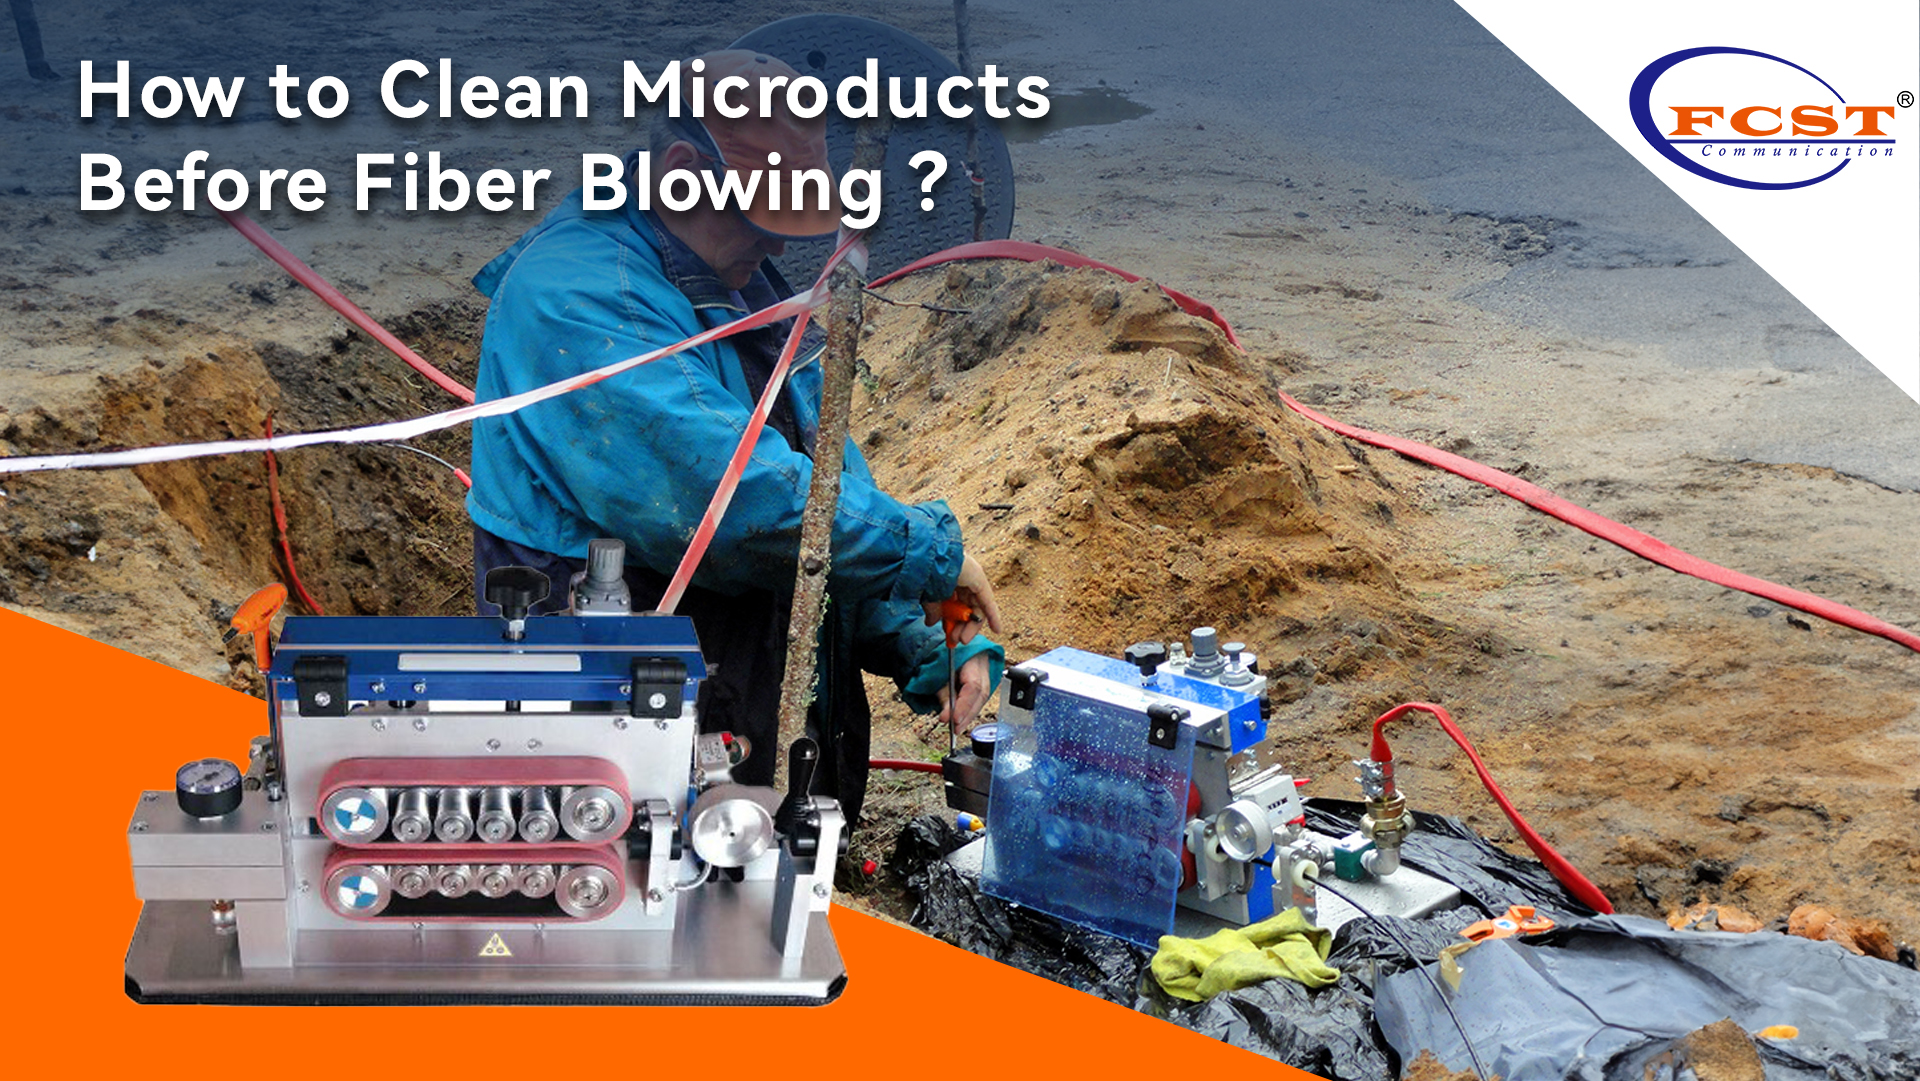 How to Clean Microducts Before Fiber Blowing?